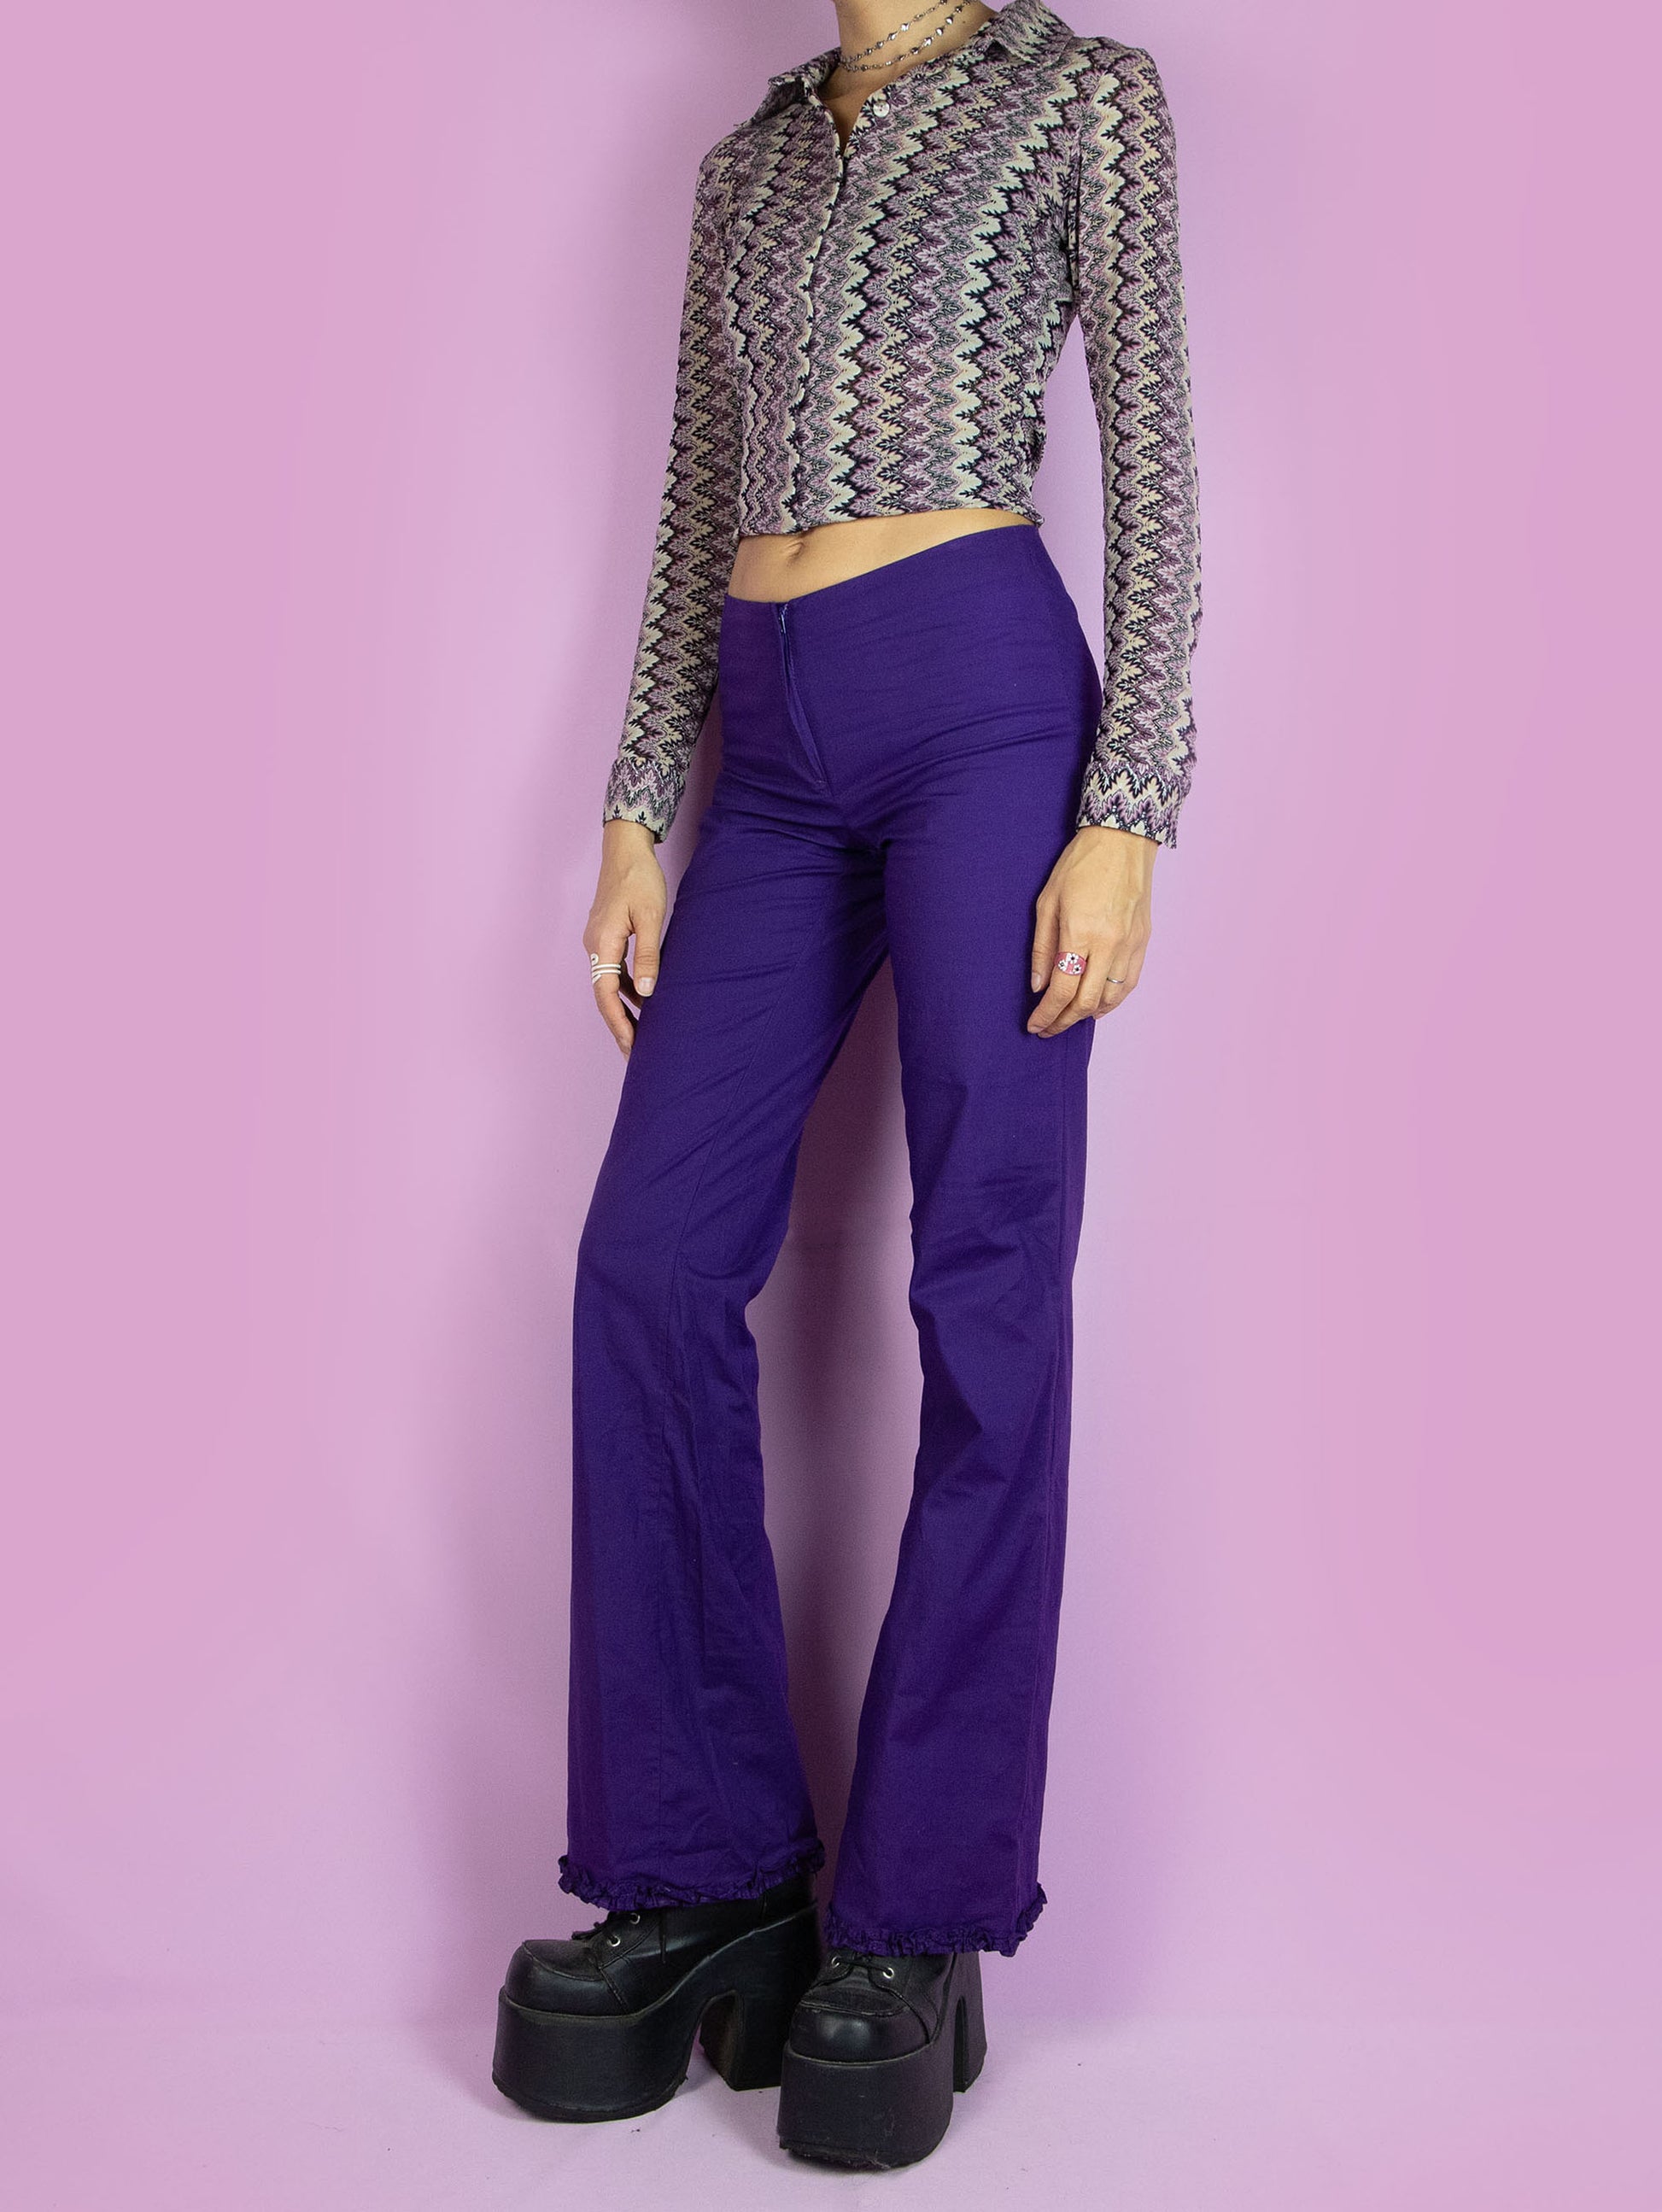 The Vintage 90s Dark Purple Flare Pants are mid-rise purple pants, slightly elastic and flared, with a front zipper closure and a gathered ruffle detail at the hem. Boho retro 1990s trousers.